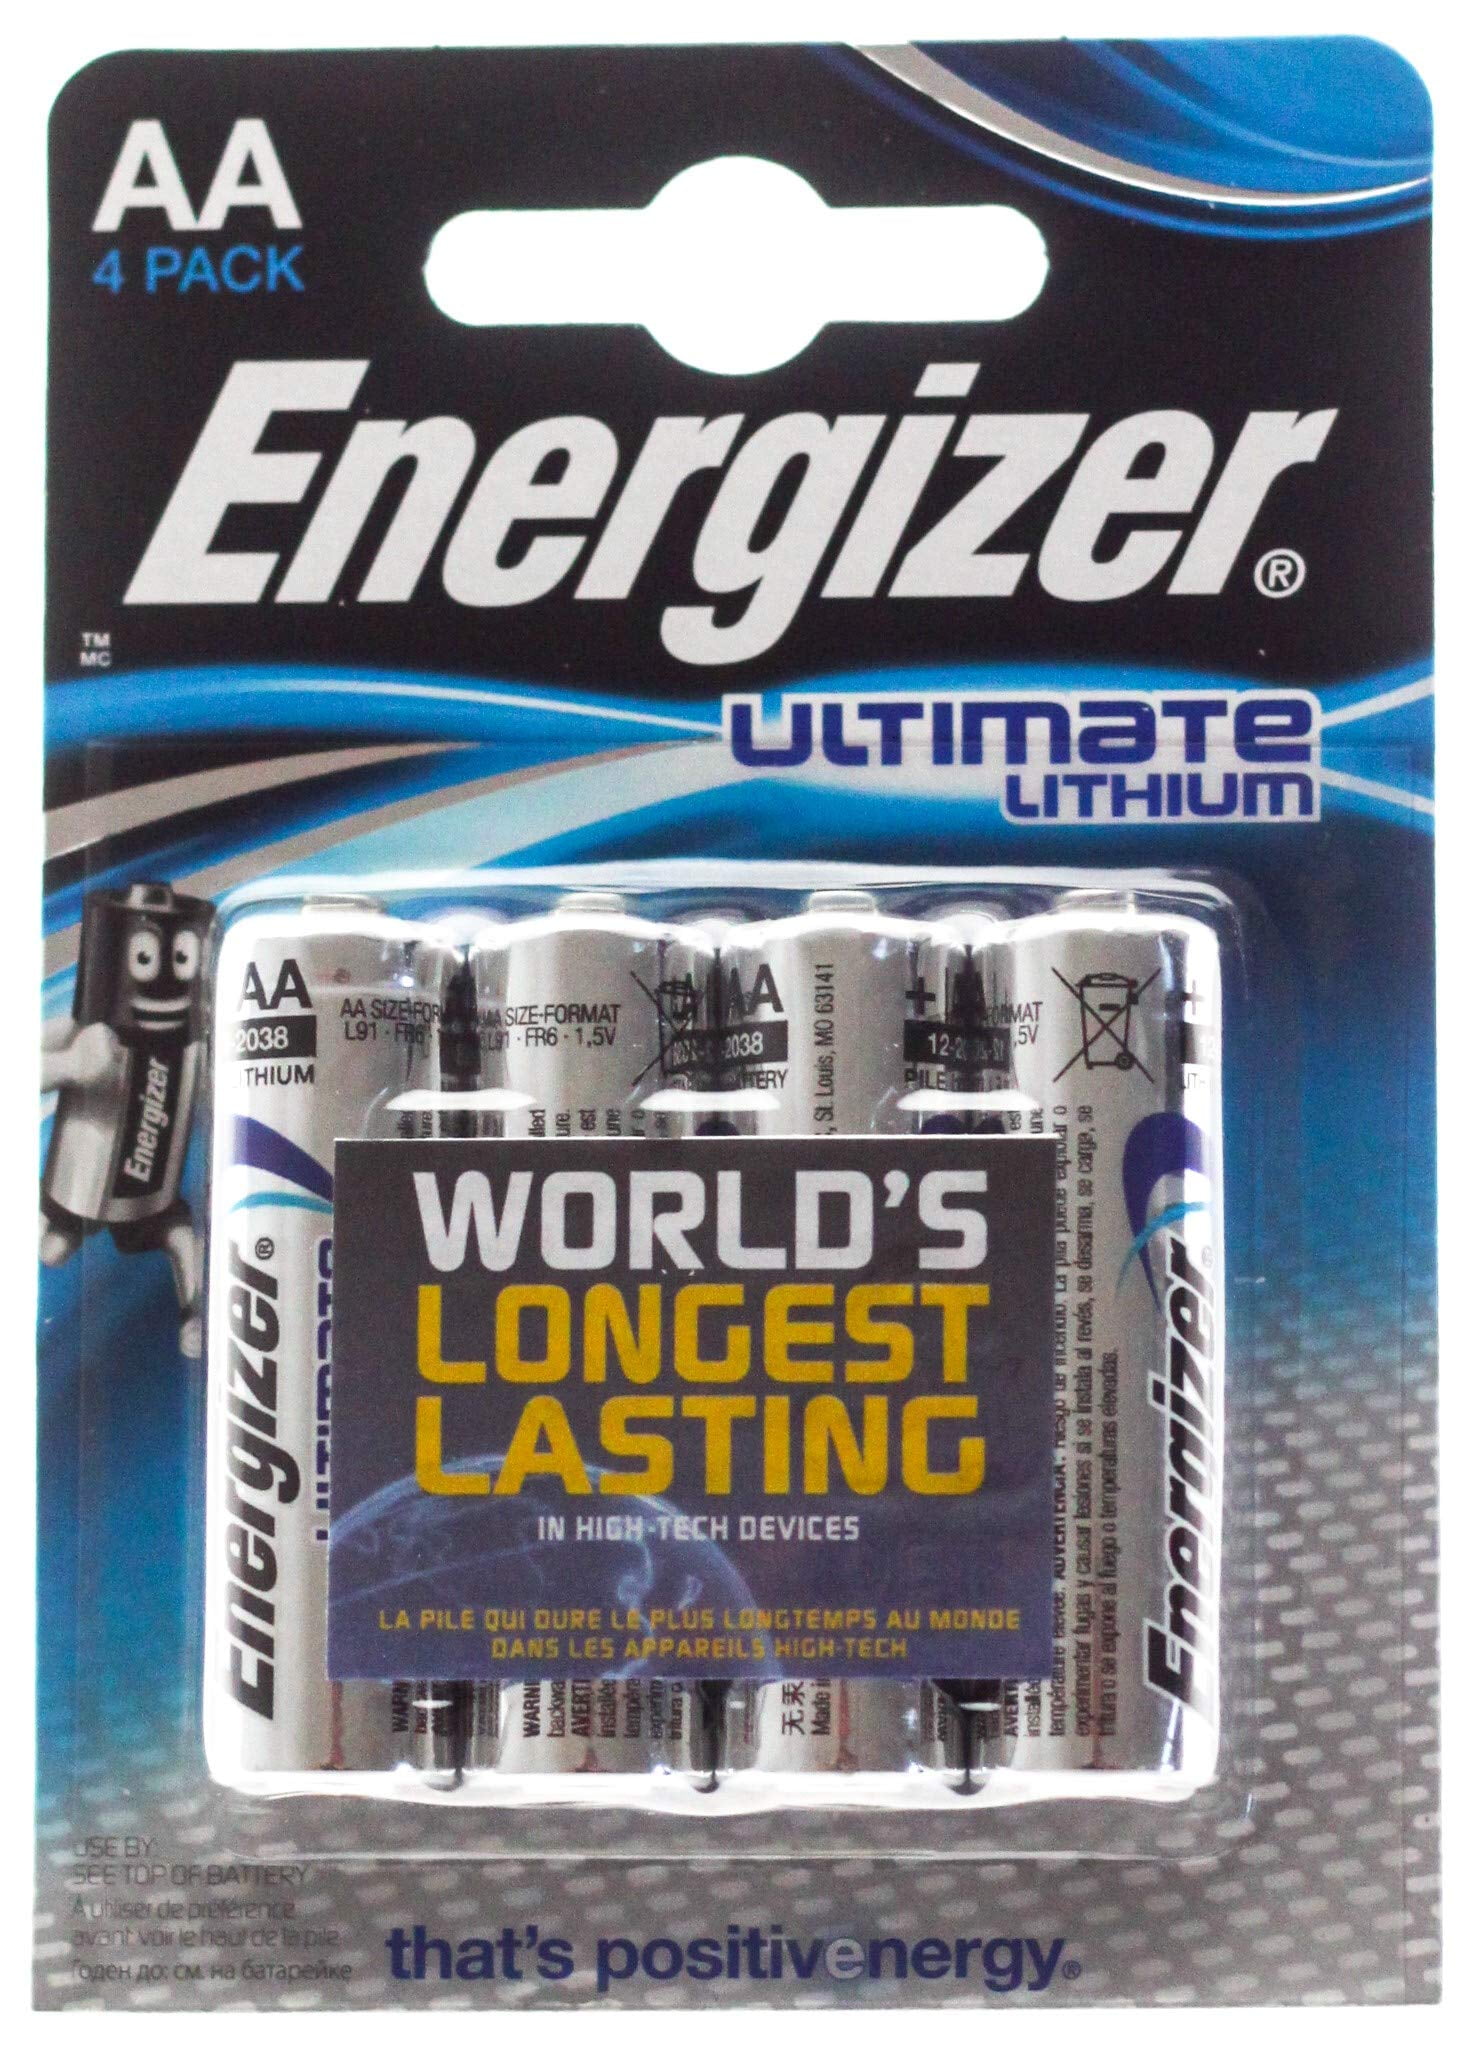 Energizer Ultimate Lithium AA Batteries (18 Pack) Date 12-2048 39800130723